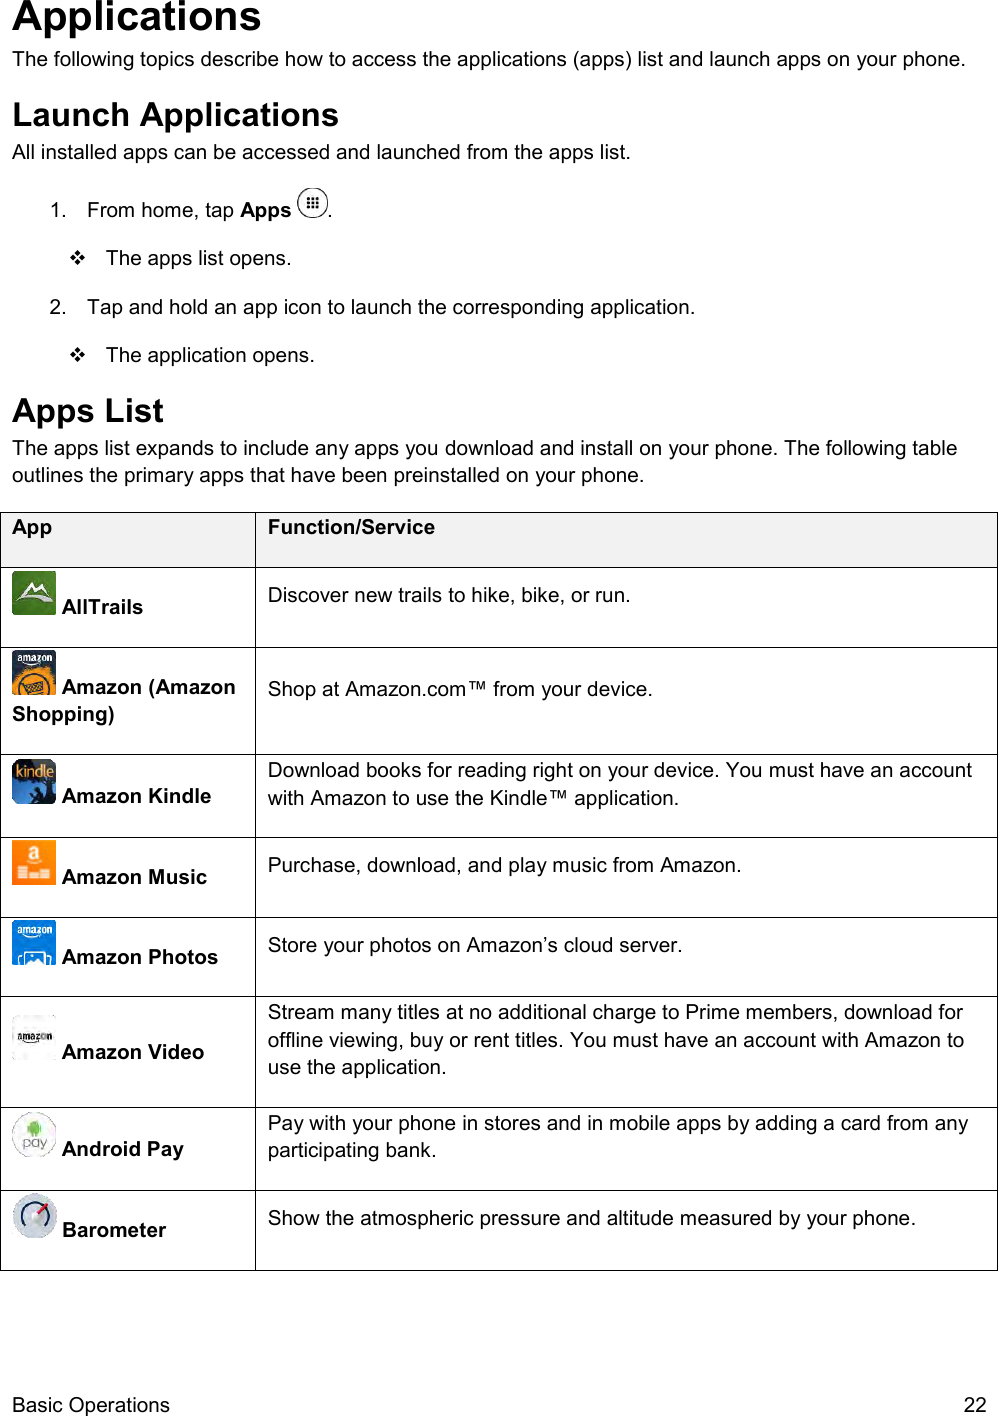  Basic Operations  22 Applications The following topics describe how to access the applications (apps) list and launch apps on your phone. Launch Applications All installed apps can be accessed and launched from the apps list. 1.  From home, tap Apps  .    The apps list opens. 2.  Tap and hold an app icon to launch the corresponding application.    The application opens. Apps List  The apps list expands to include any apps you download and install on your phone. The following table outlines the primary apps that have been preinstalled on your phone. App Function/Service  AllTrails Discover new trails to hike, bike, or run.  Amazon (Amazon Shopping) Shop at Amazon.com™ from your device.   Amazon Kindle Download books for reading right on your device. You must have an account with Amazon to use the Kindle™ application.  Amazon Music Purchase, download, and play music from Amazon.  Amazon Photos Store your photos on Amazon’s cloud server.  Amazon Video Stream many titles at no additional charge to Prime members, download for offline viewing, buy or rent titles. You must have an account with Amazon to use the application.  Android Pay Pay with your phone in stores and in mobile apps by adding a card from any participating bank.  Barometer Show the atmospheric pressure and altitude measured by your phone. 